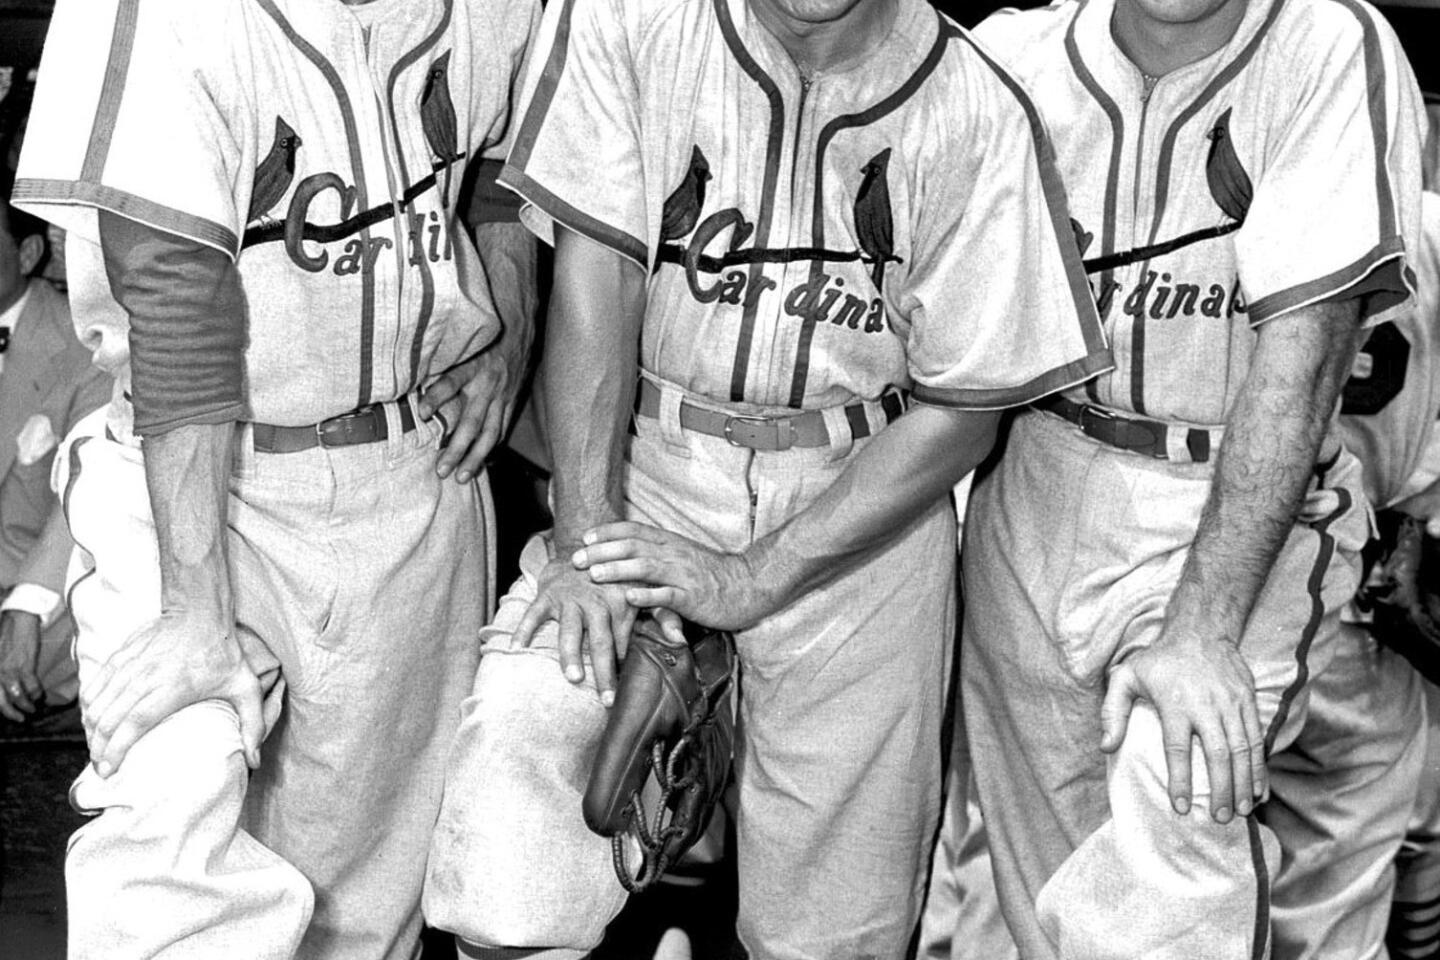 Lillian Musial, wife of Hall of Famer, dies at 91 - The Boston Globe